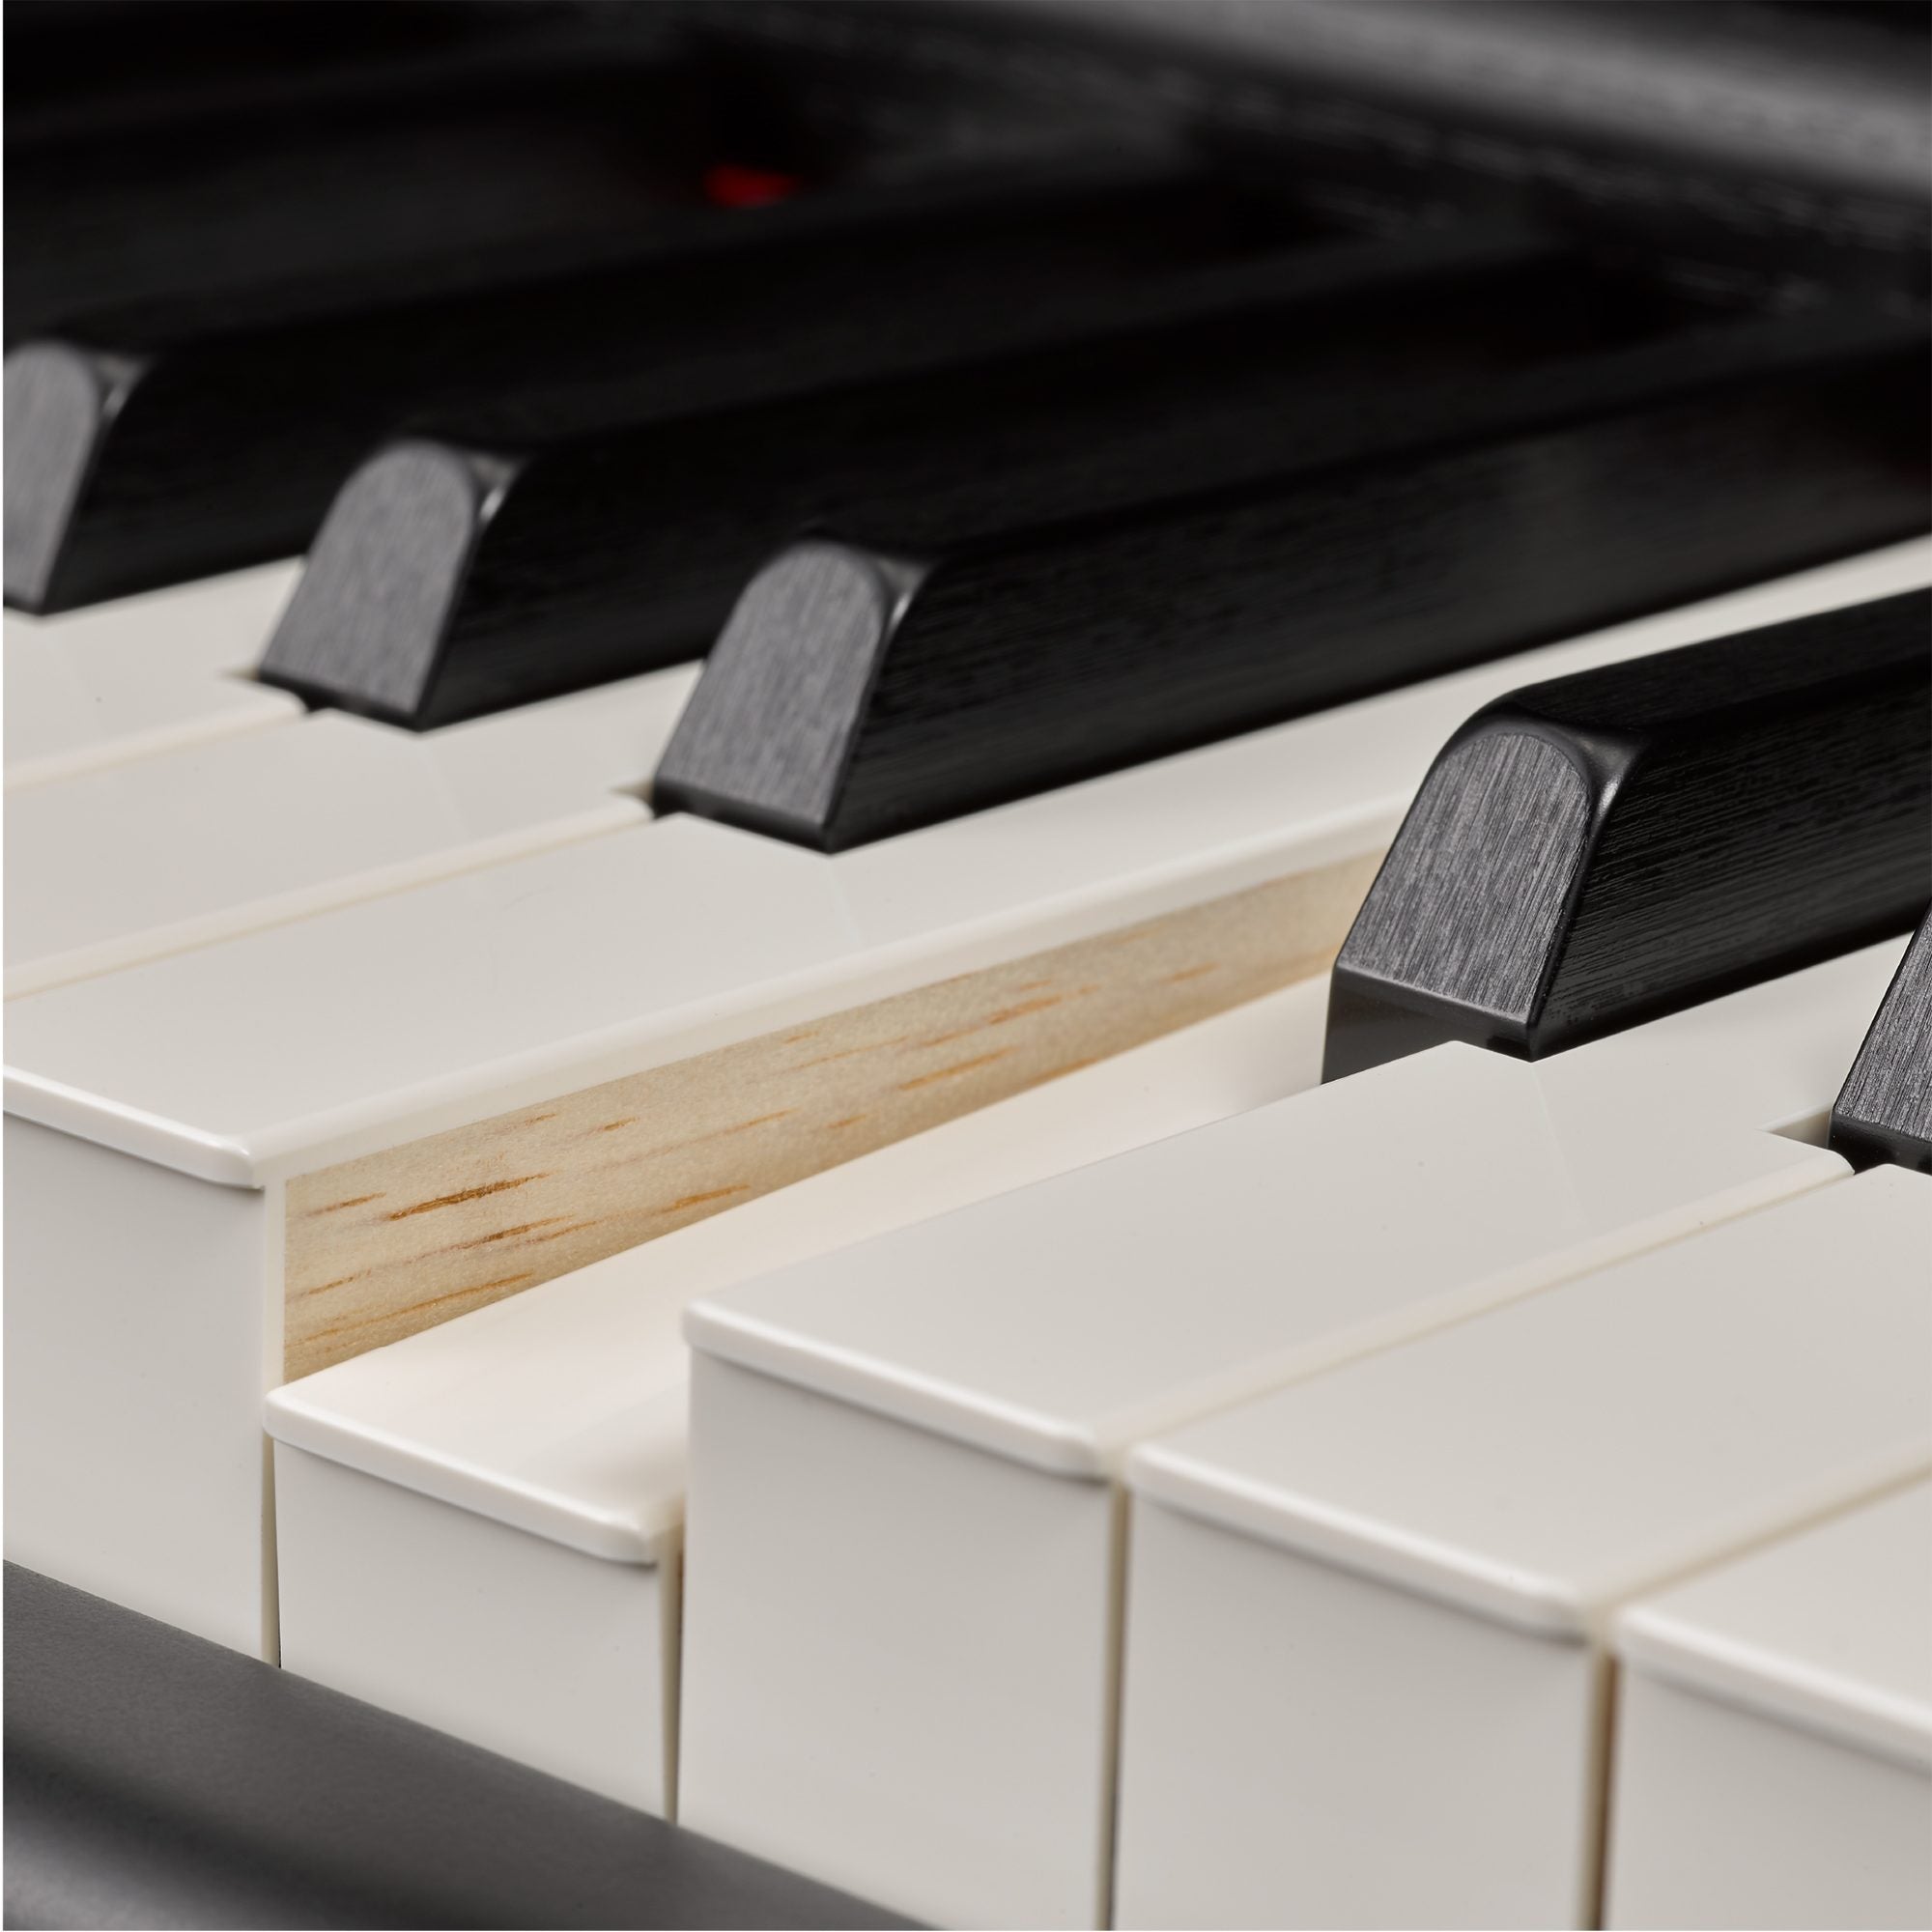 Correct Posture When Playing the Piano - Yamaha - United States